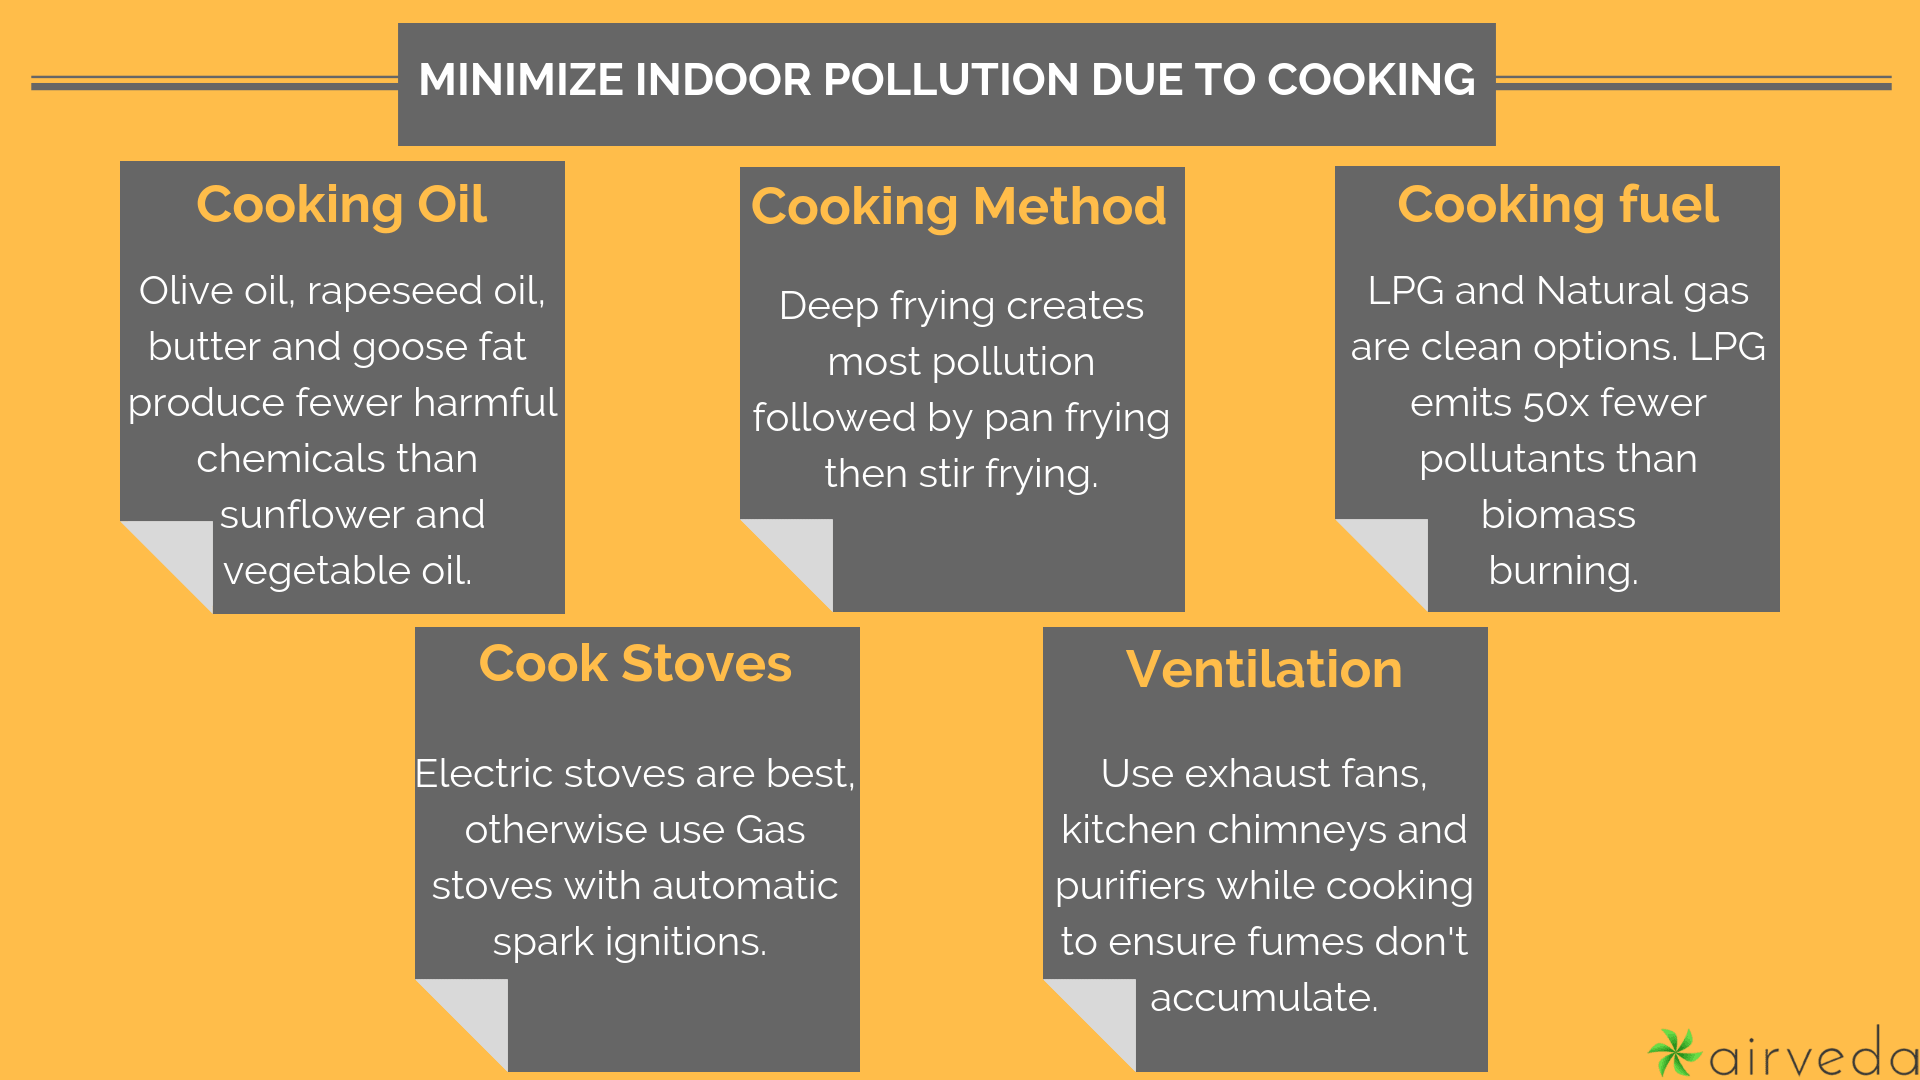 https://www.airveda.com/resources/images/pollution_due_to_cooking/cooking.png